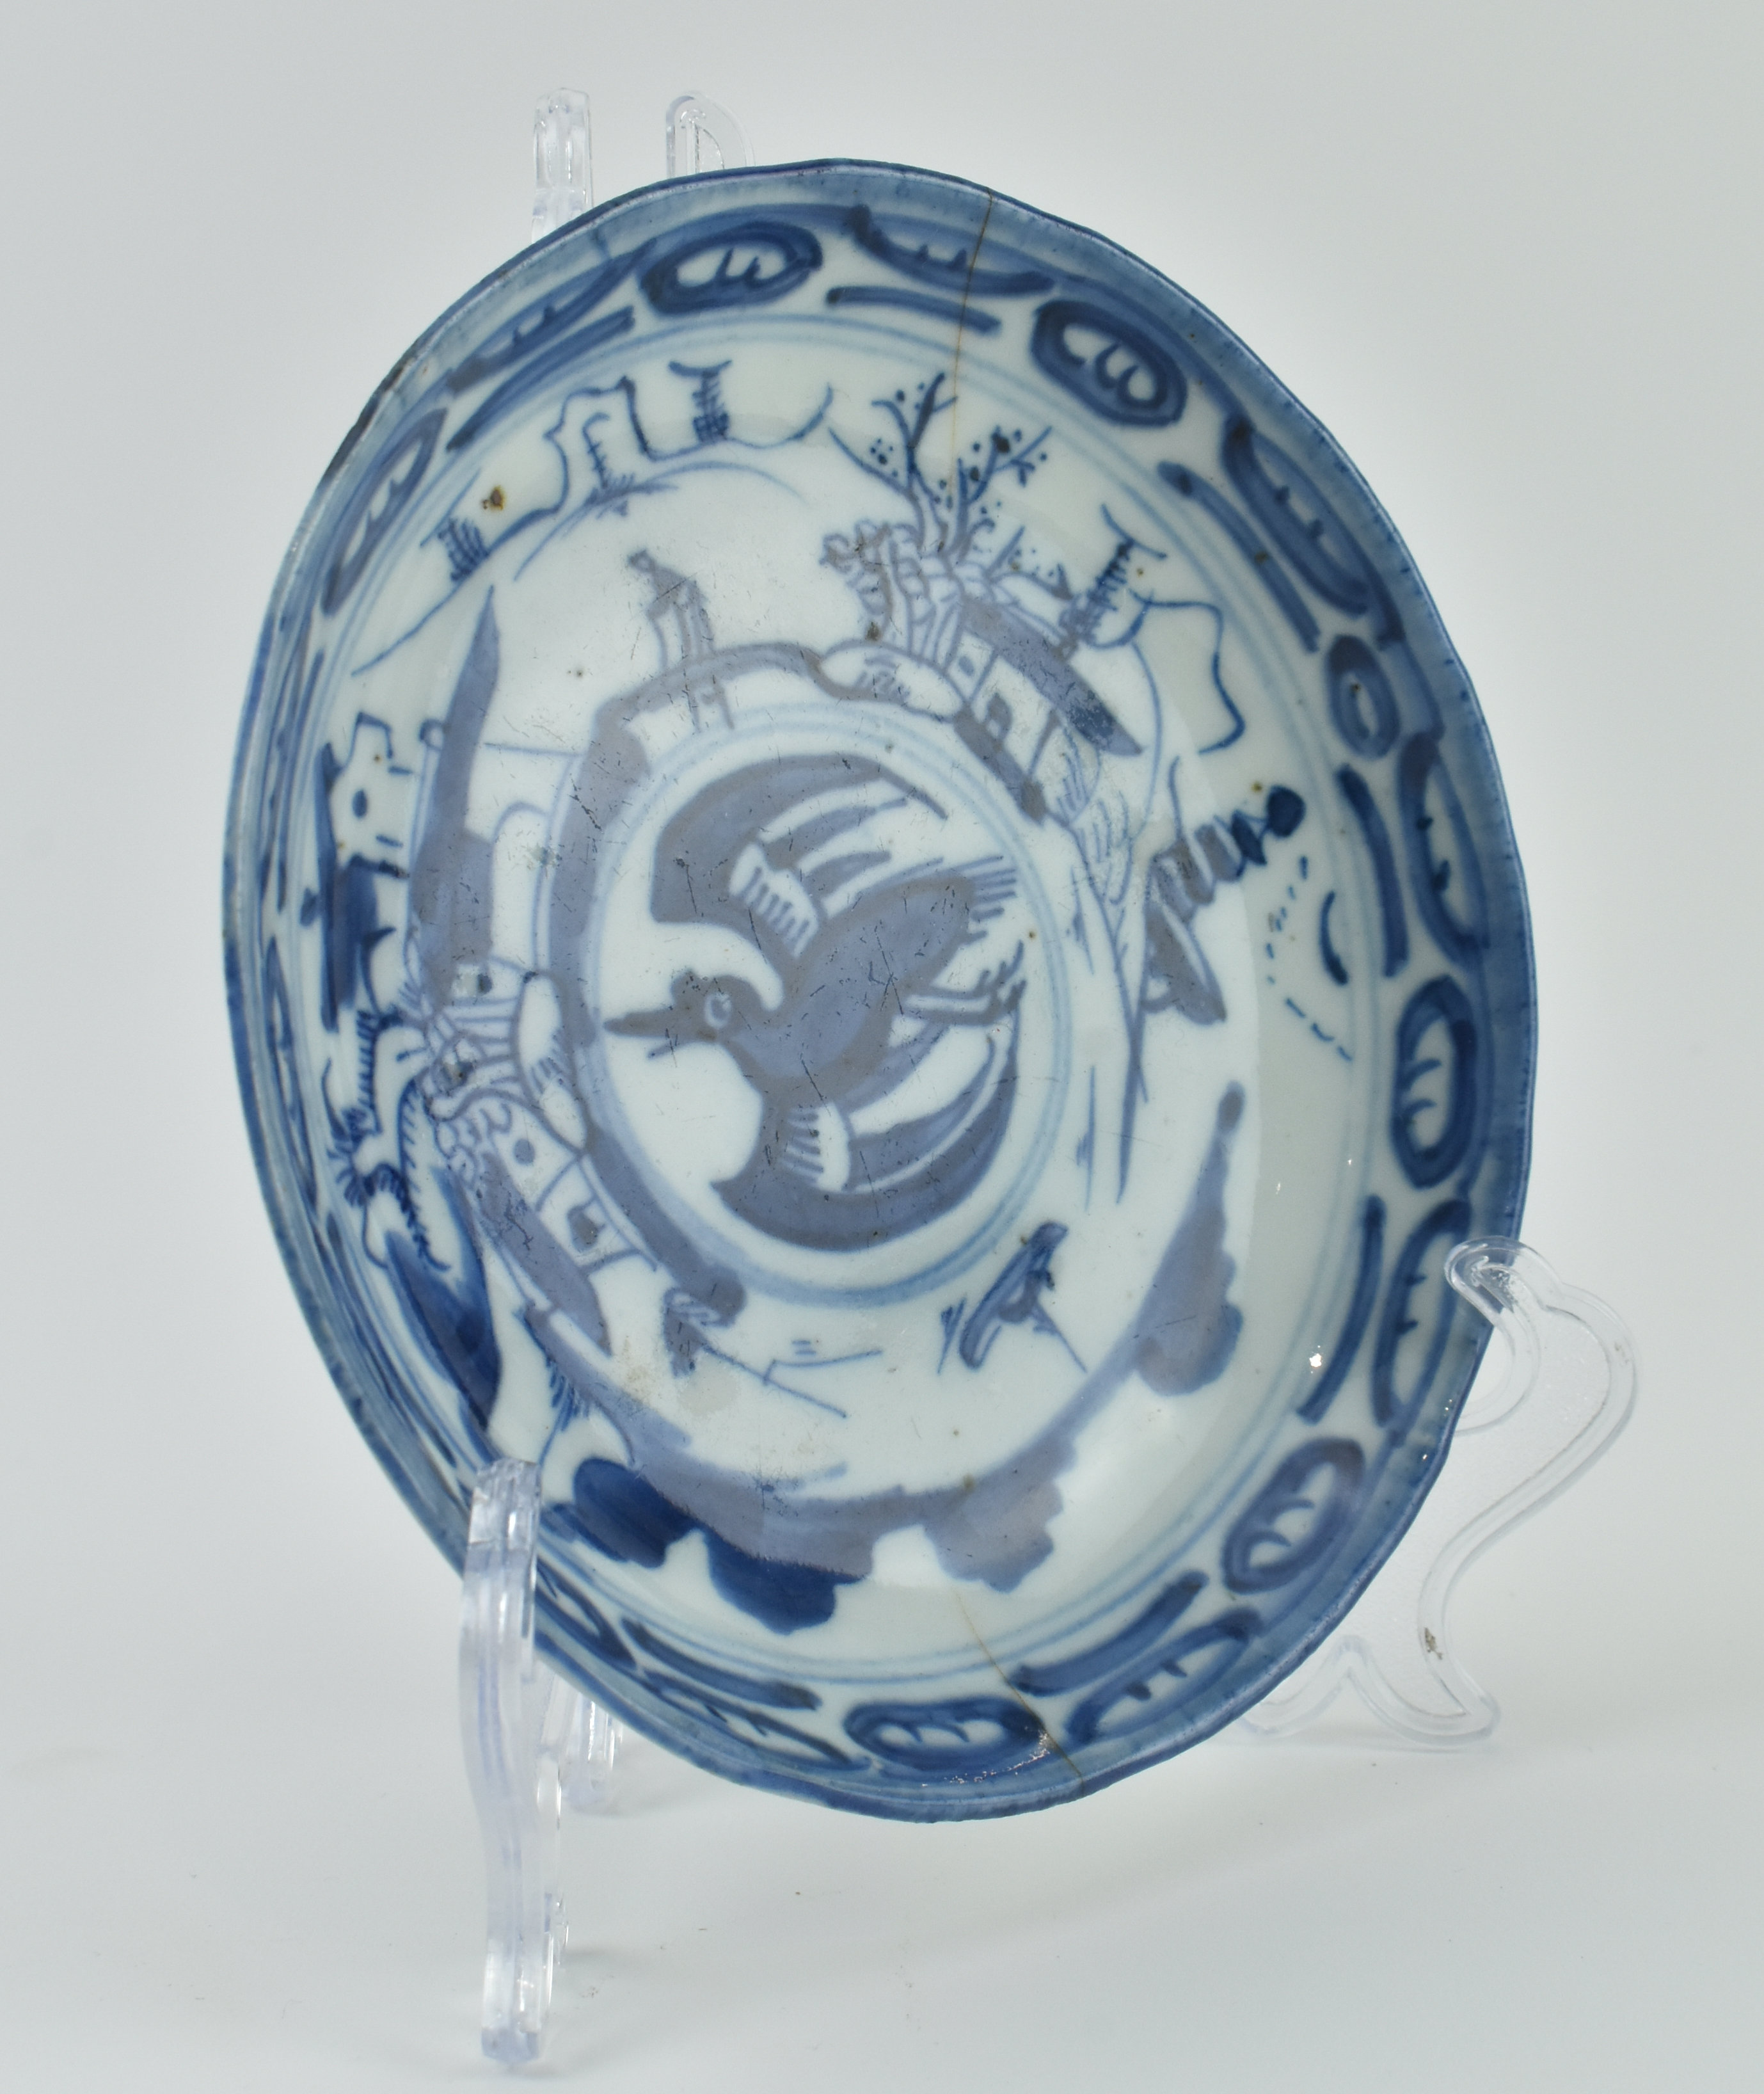 QING DAOGUANG BLUE AND WHITE PLATE 清 道光 青花山水盘 - Image 3 of 8